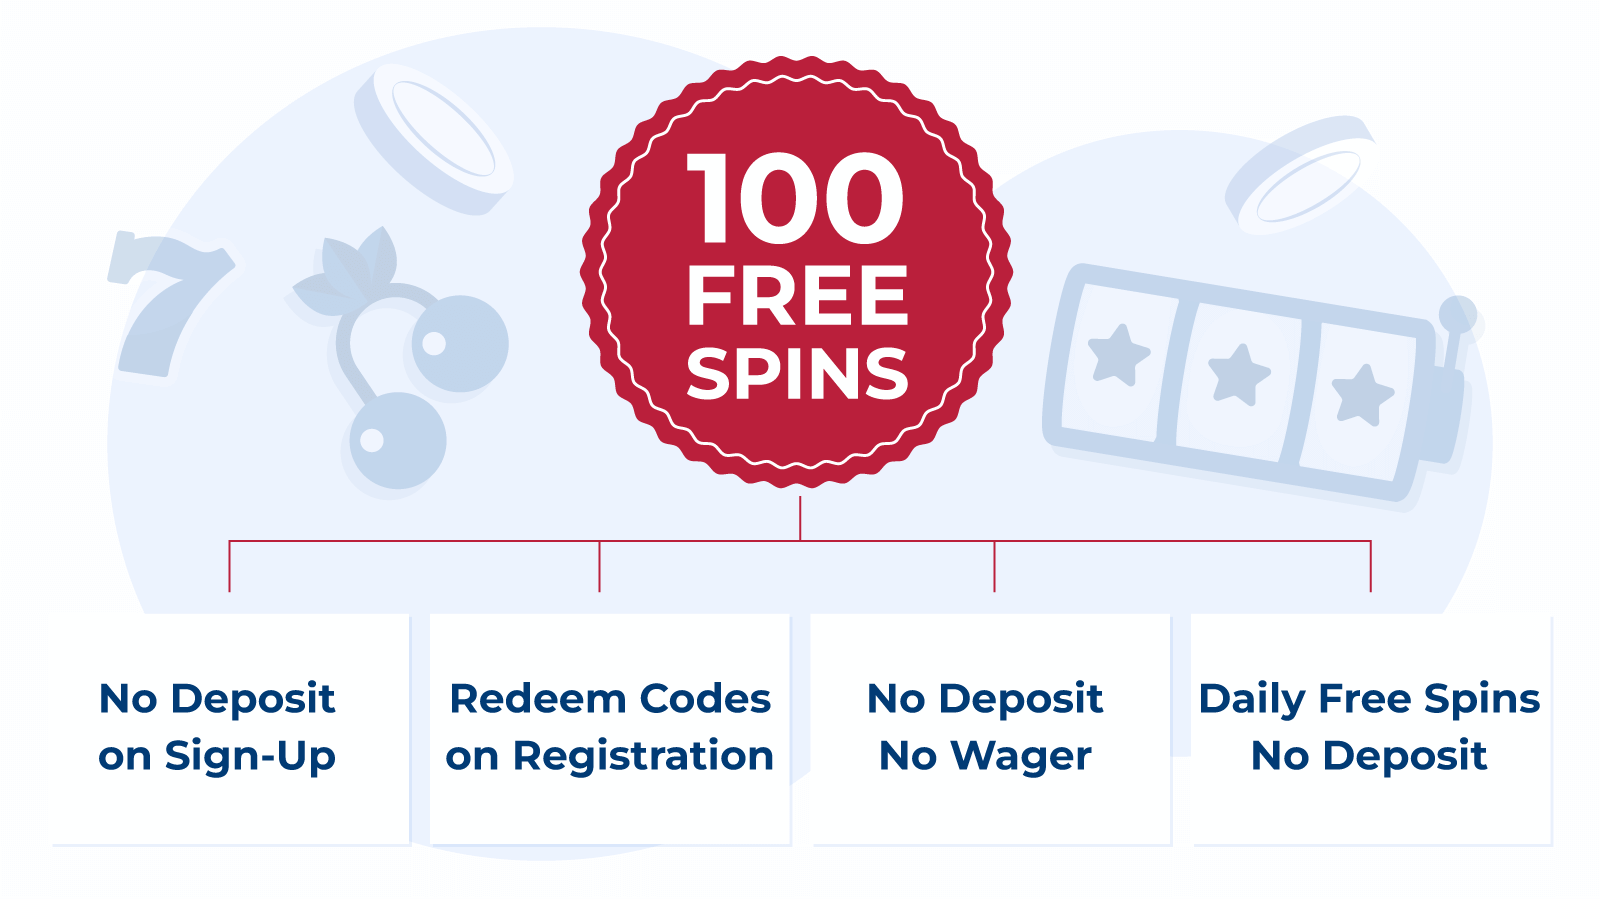 Compare the Types of 100 Free Spins You Can Get